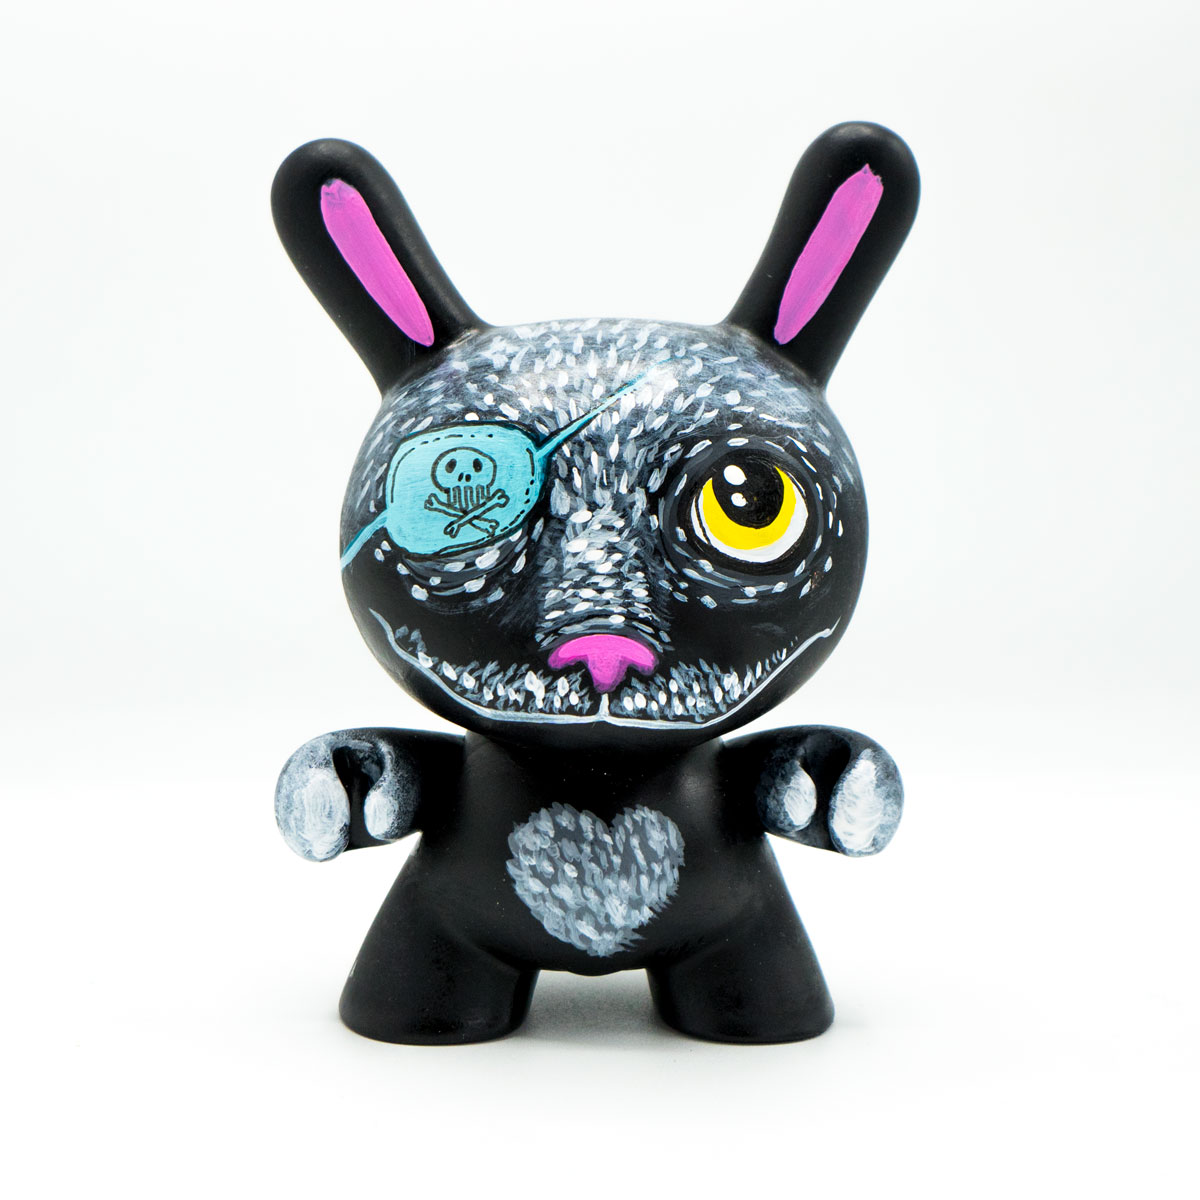 painted black dunny